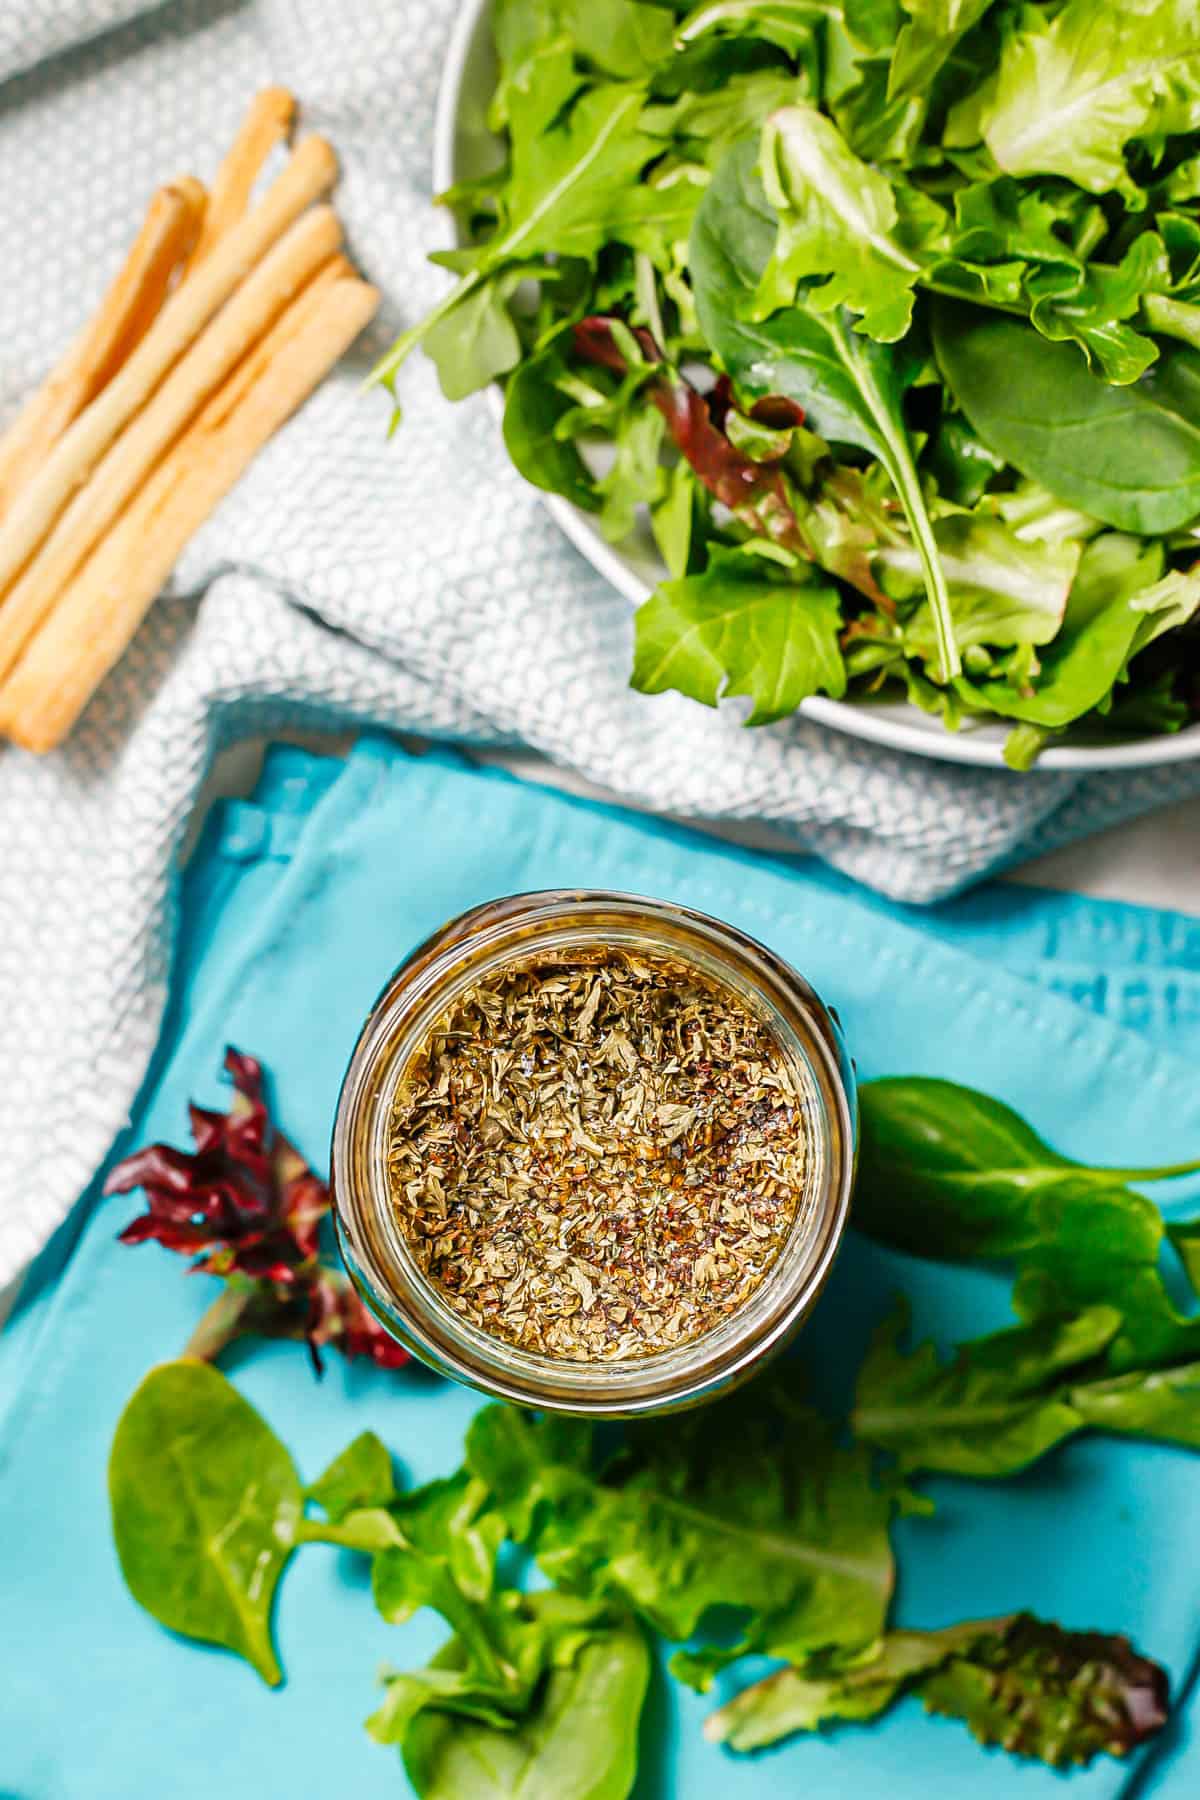 An overhead view of a glass jar of salad dressing with herbs at the top and a bowl of mixed greens to the side.